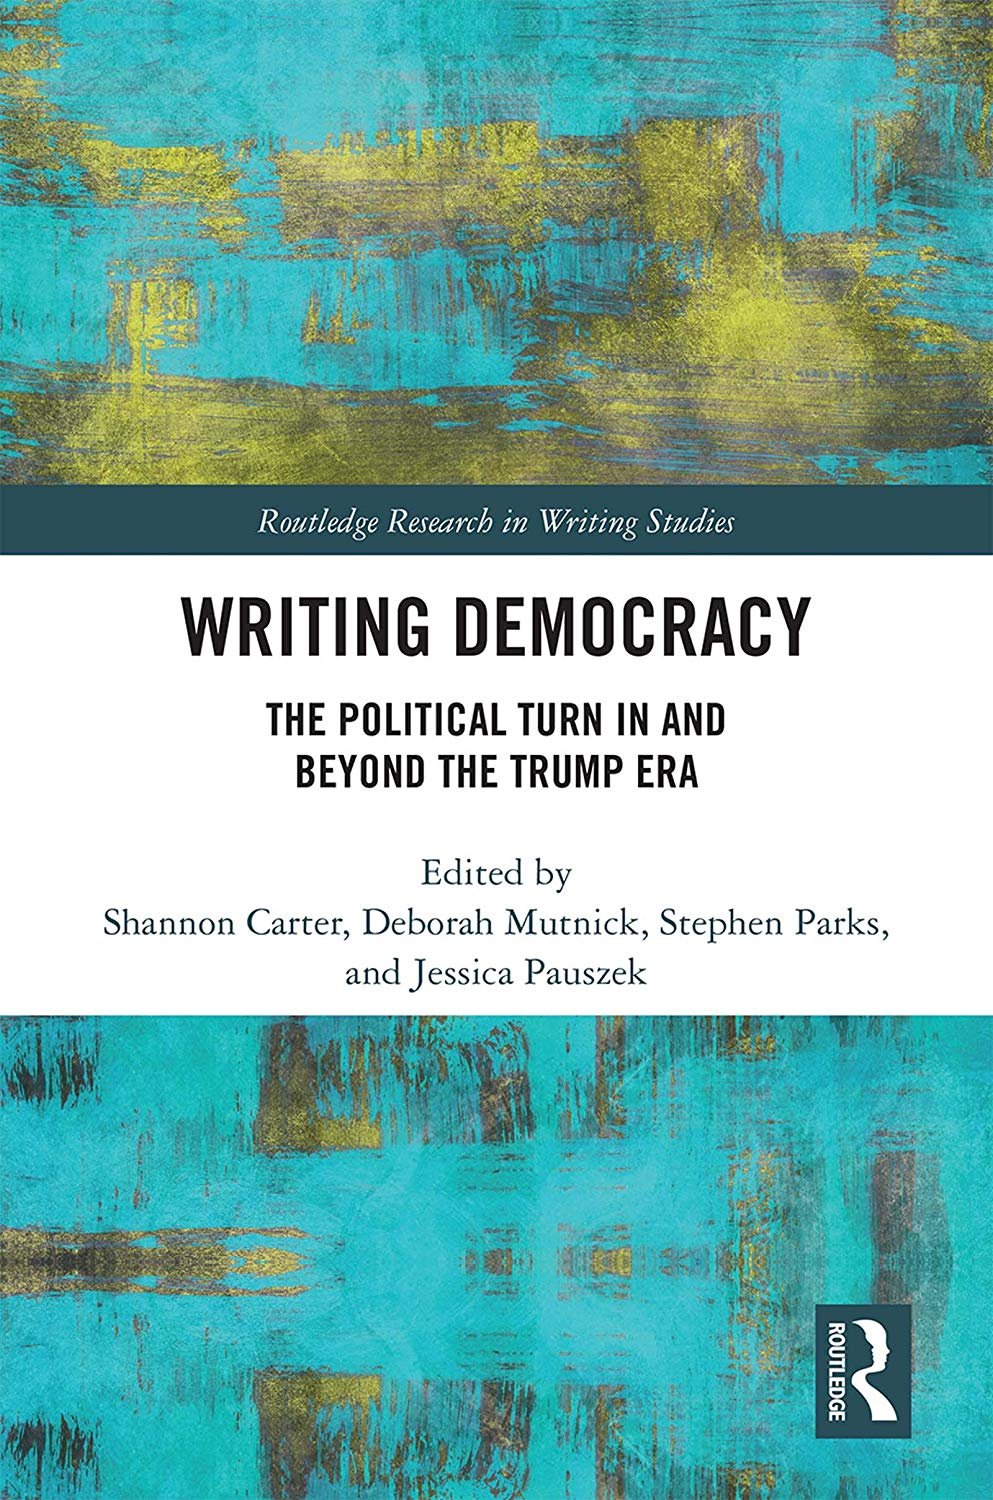 Writing Democracy: The Political Turn in and Beyond the Trump Era